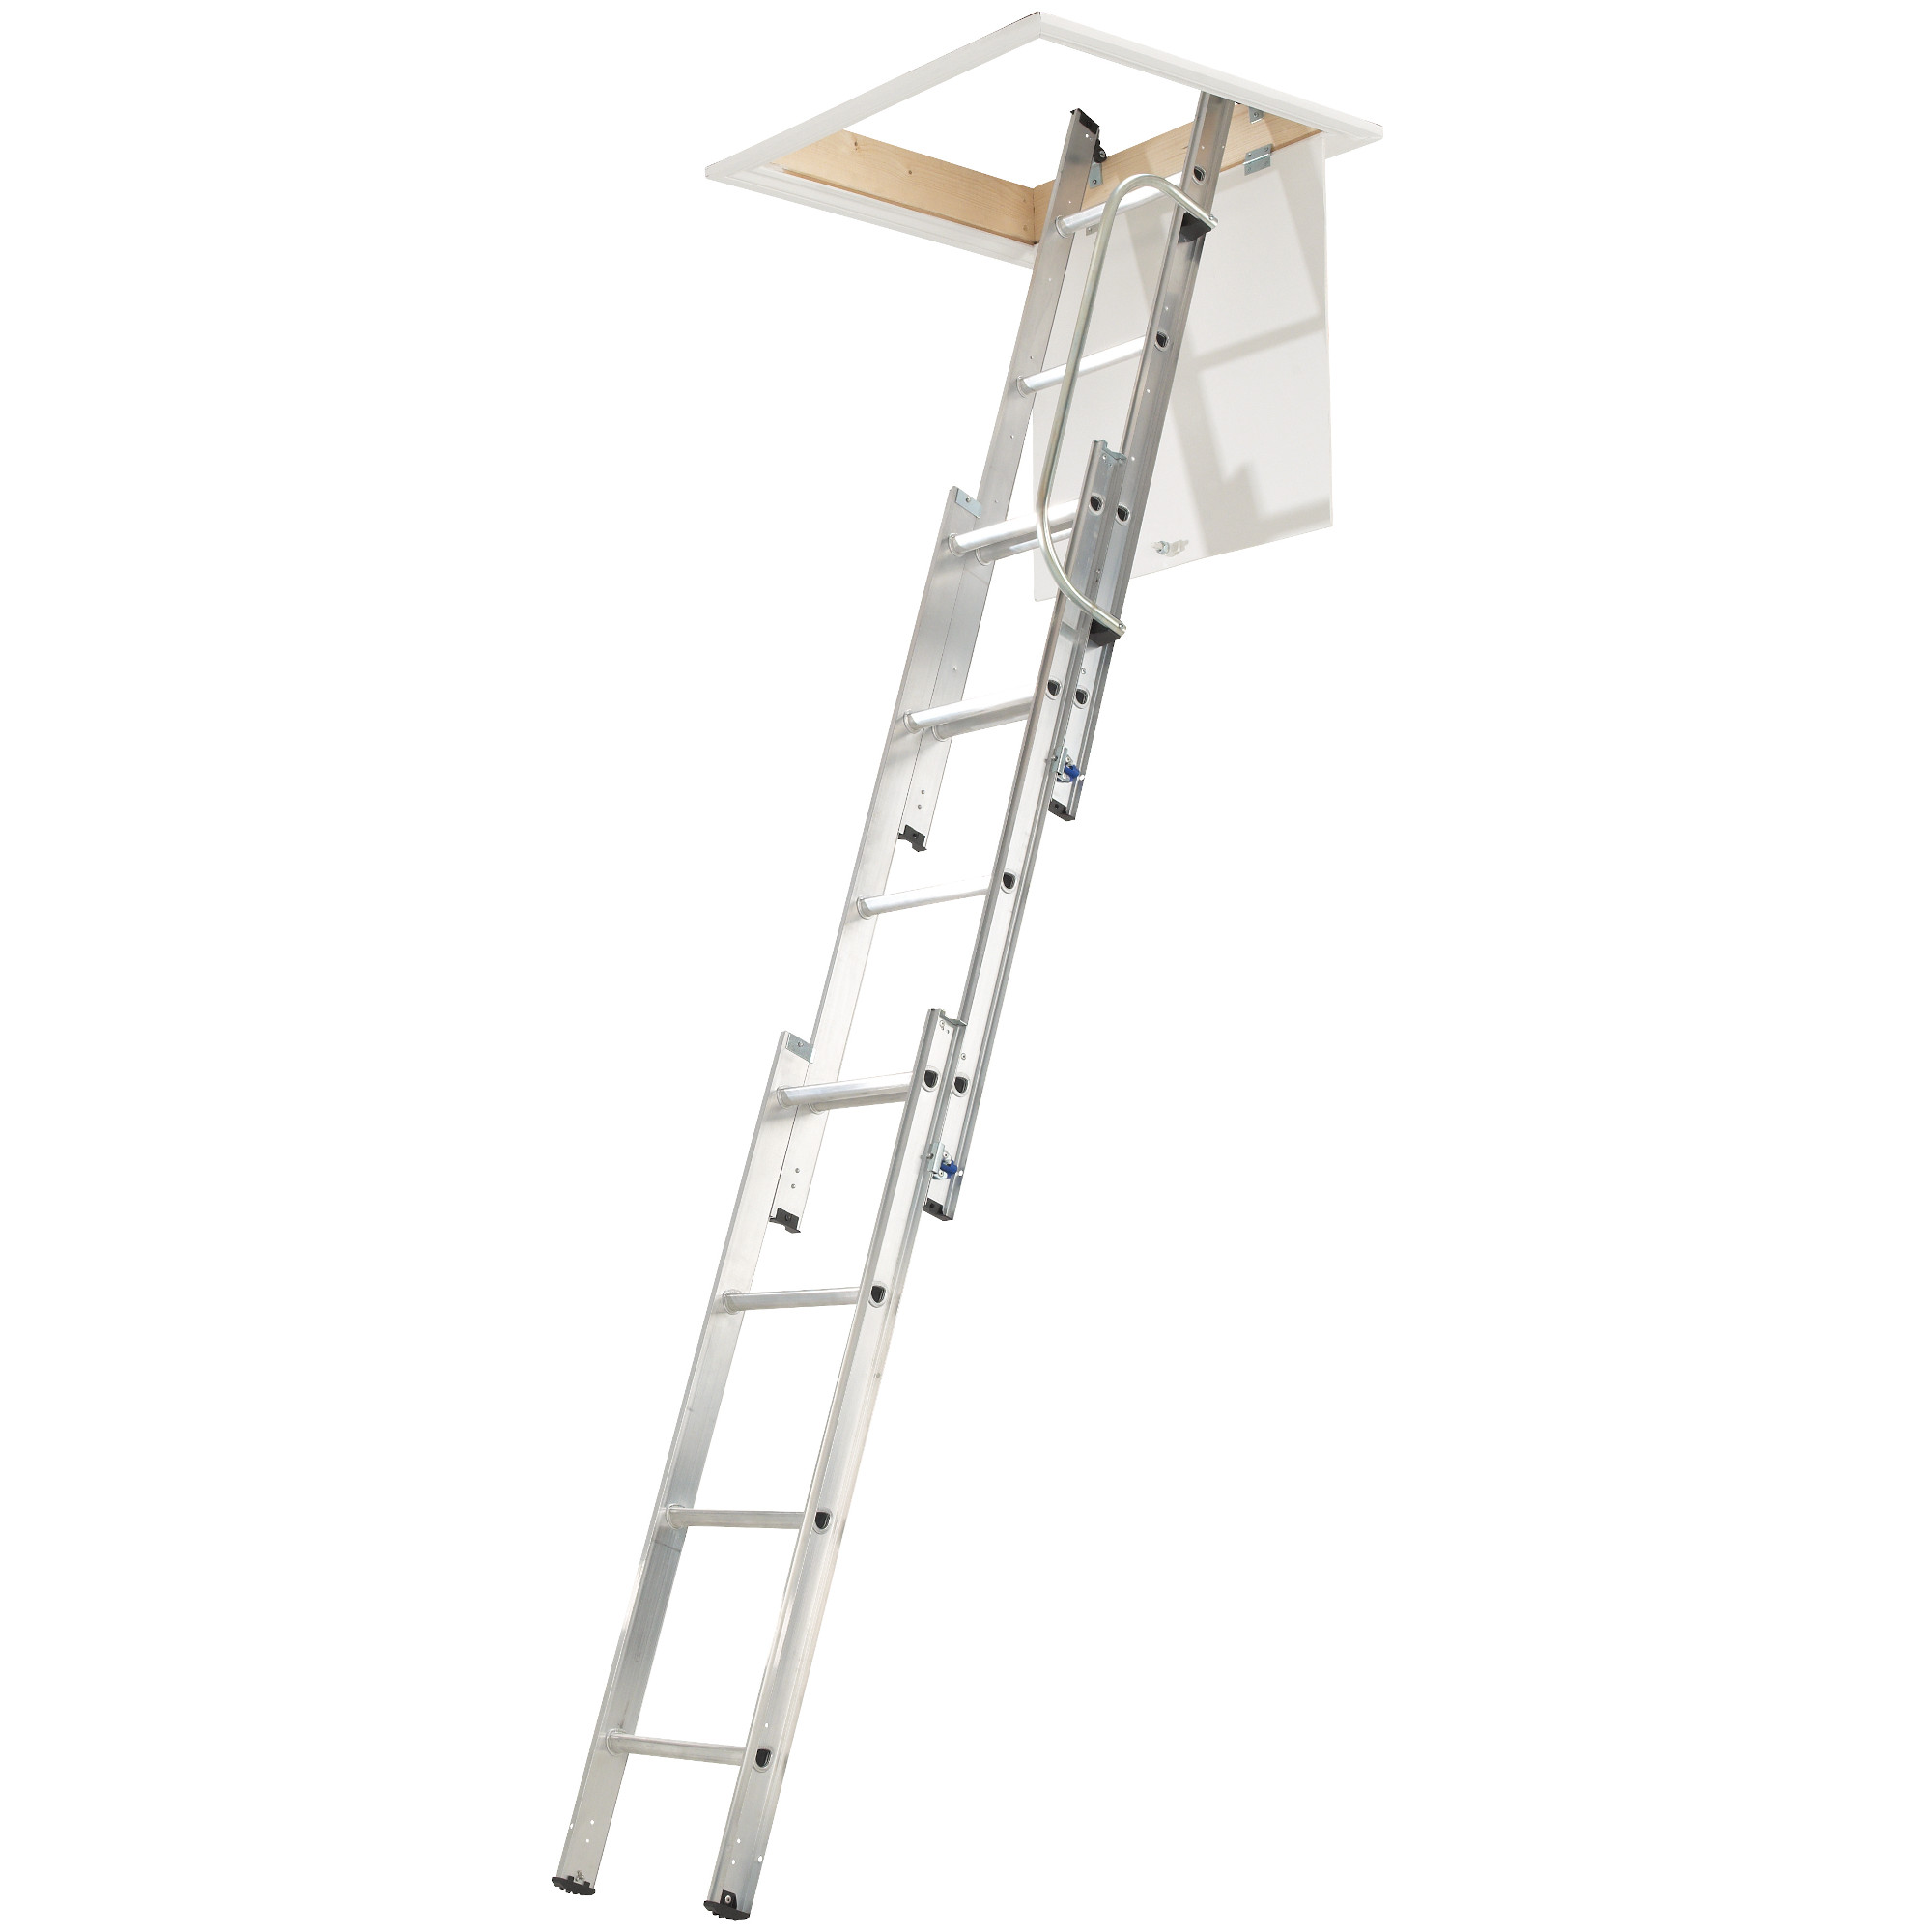 Werner 3 Section Loft Ladder With Handrail